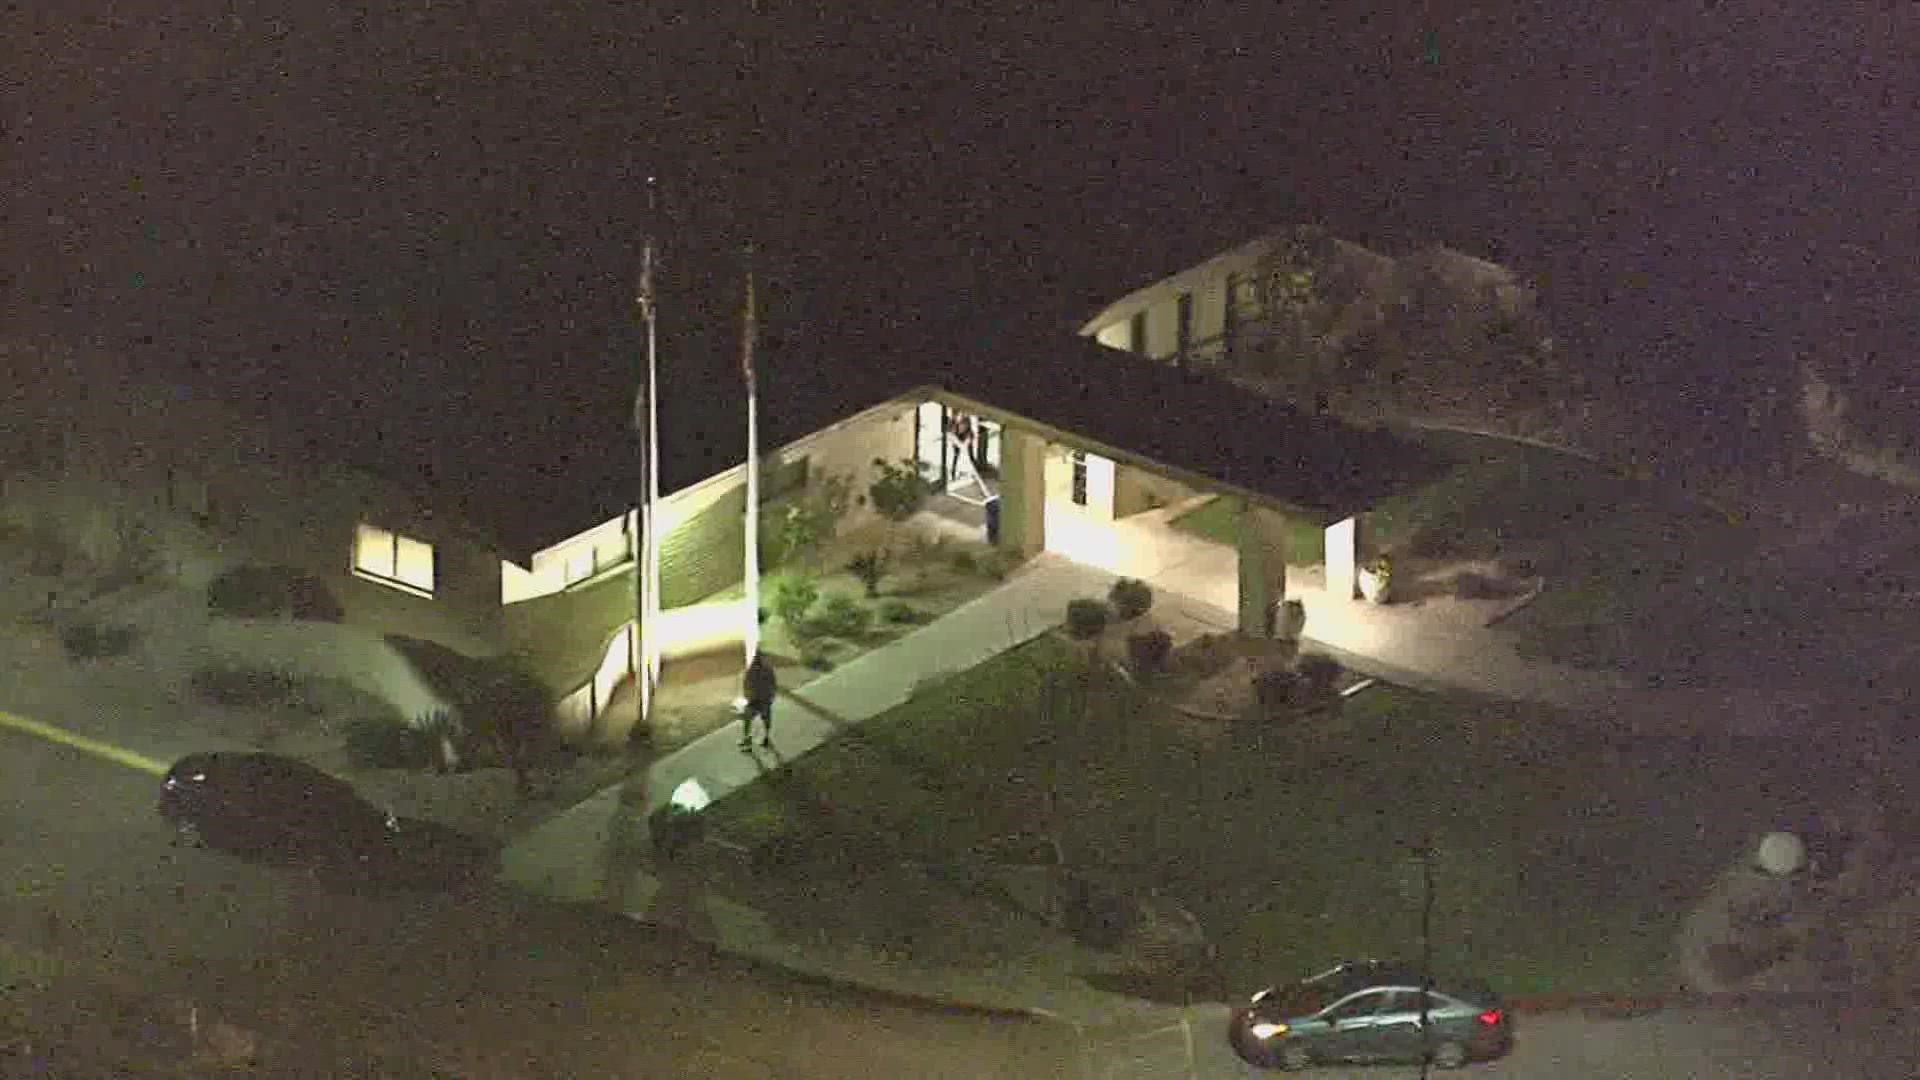 Officials are investigating the death of a student at Canyon State Academy as a possible overdose.